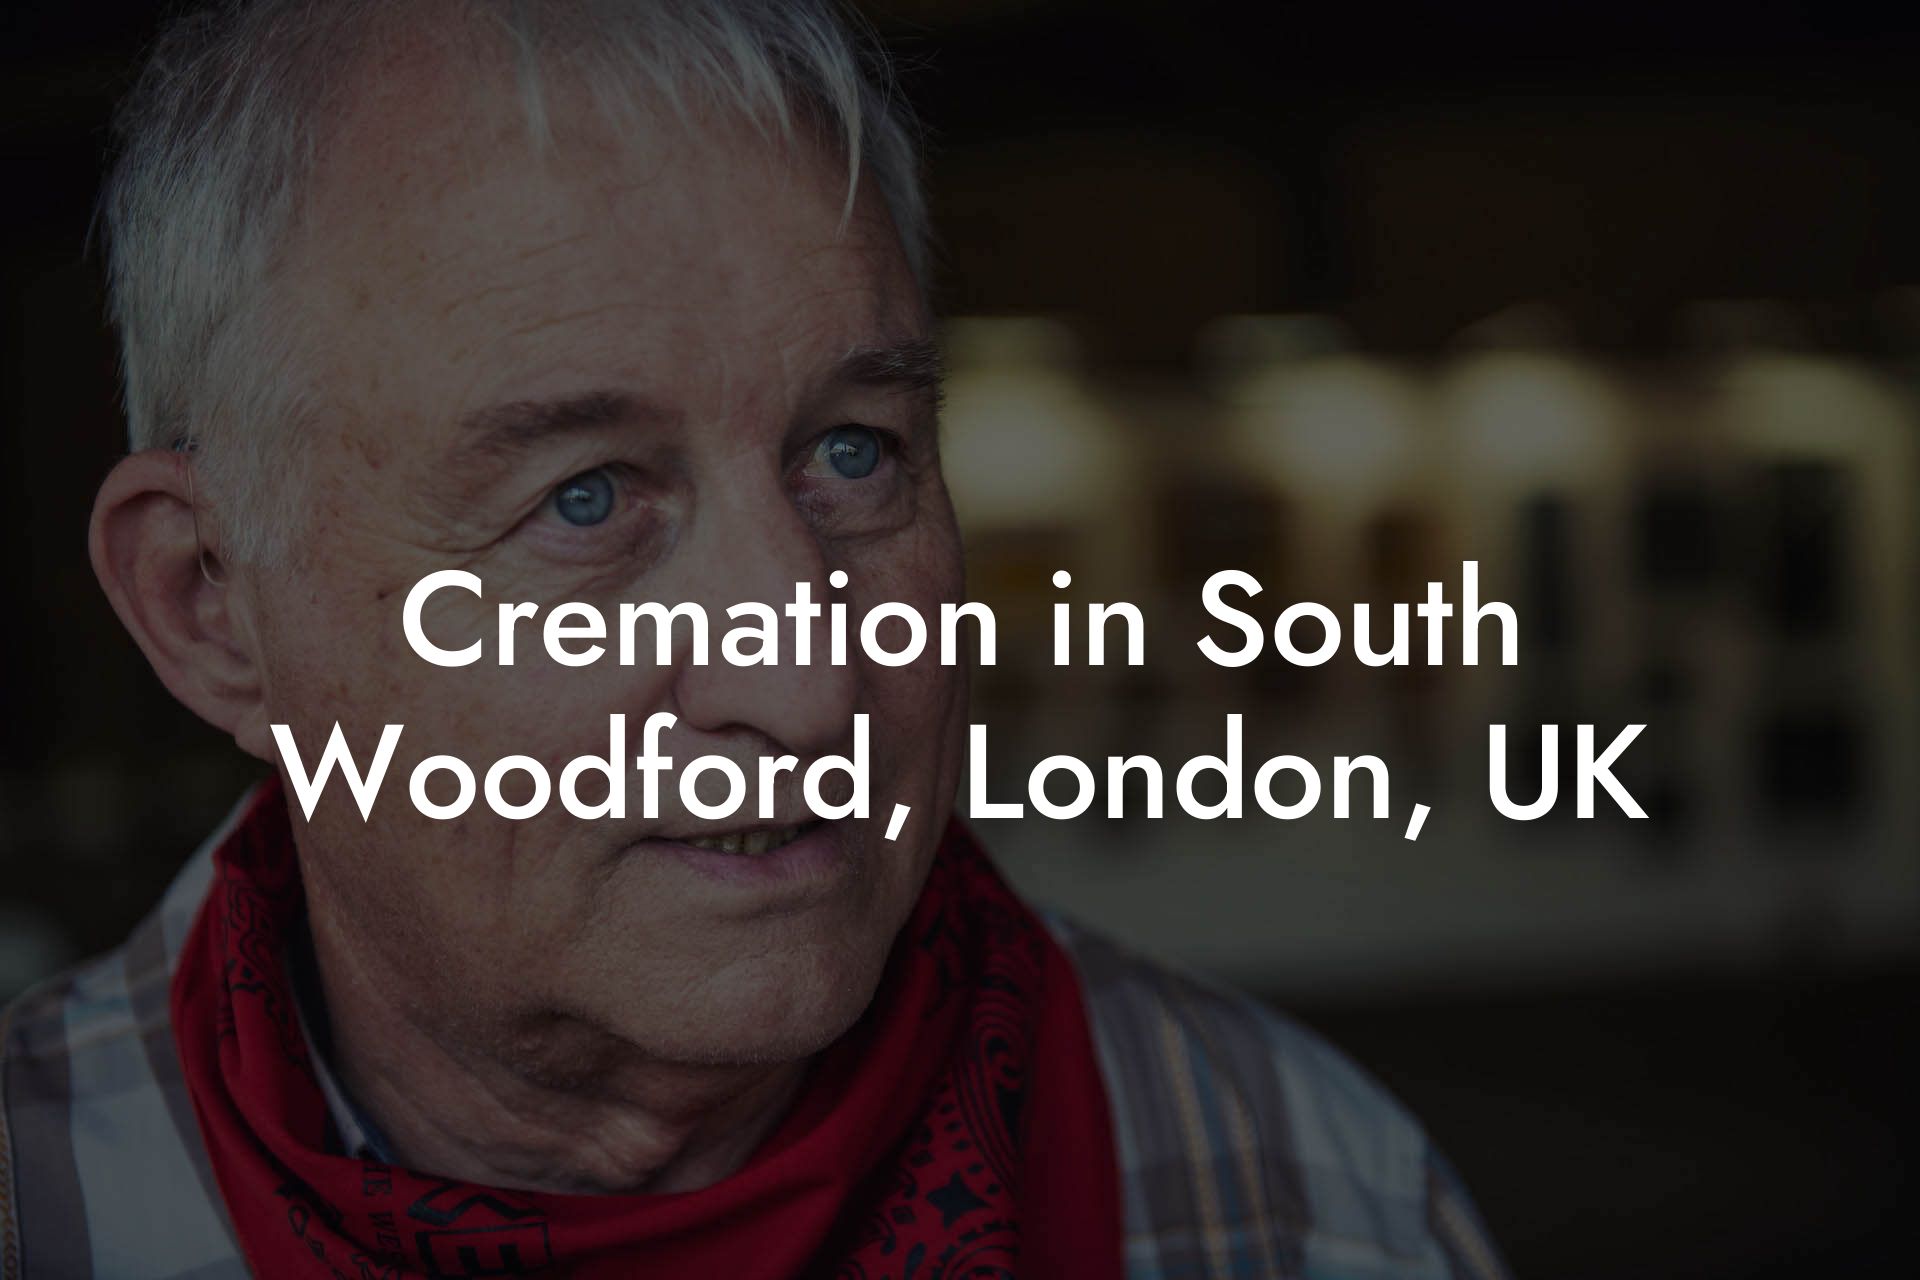 Cremation in South Woodford, London, UK